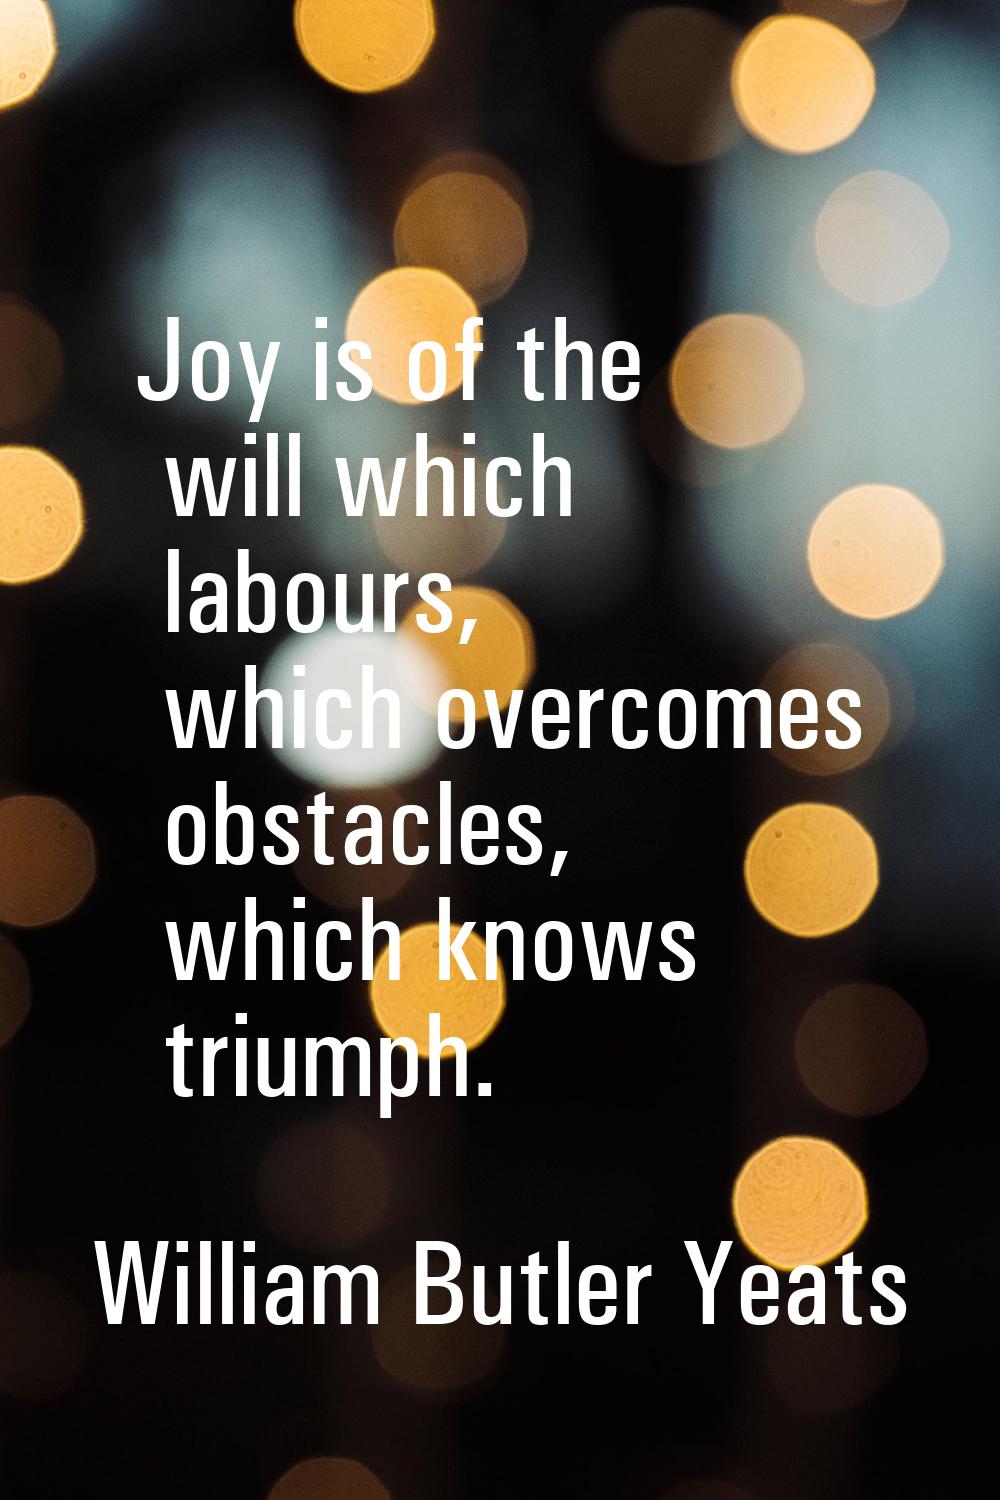 Joy is of the will which labours, which overcomes obstacles, which knows triumph.